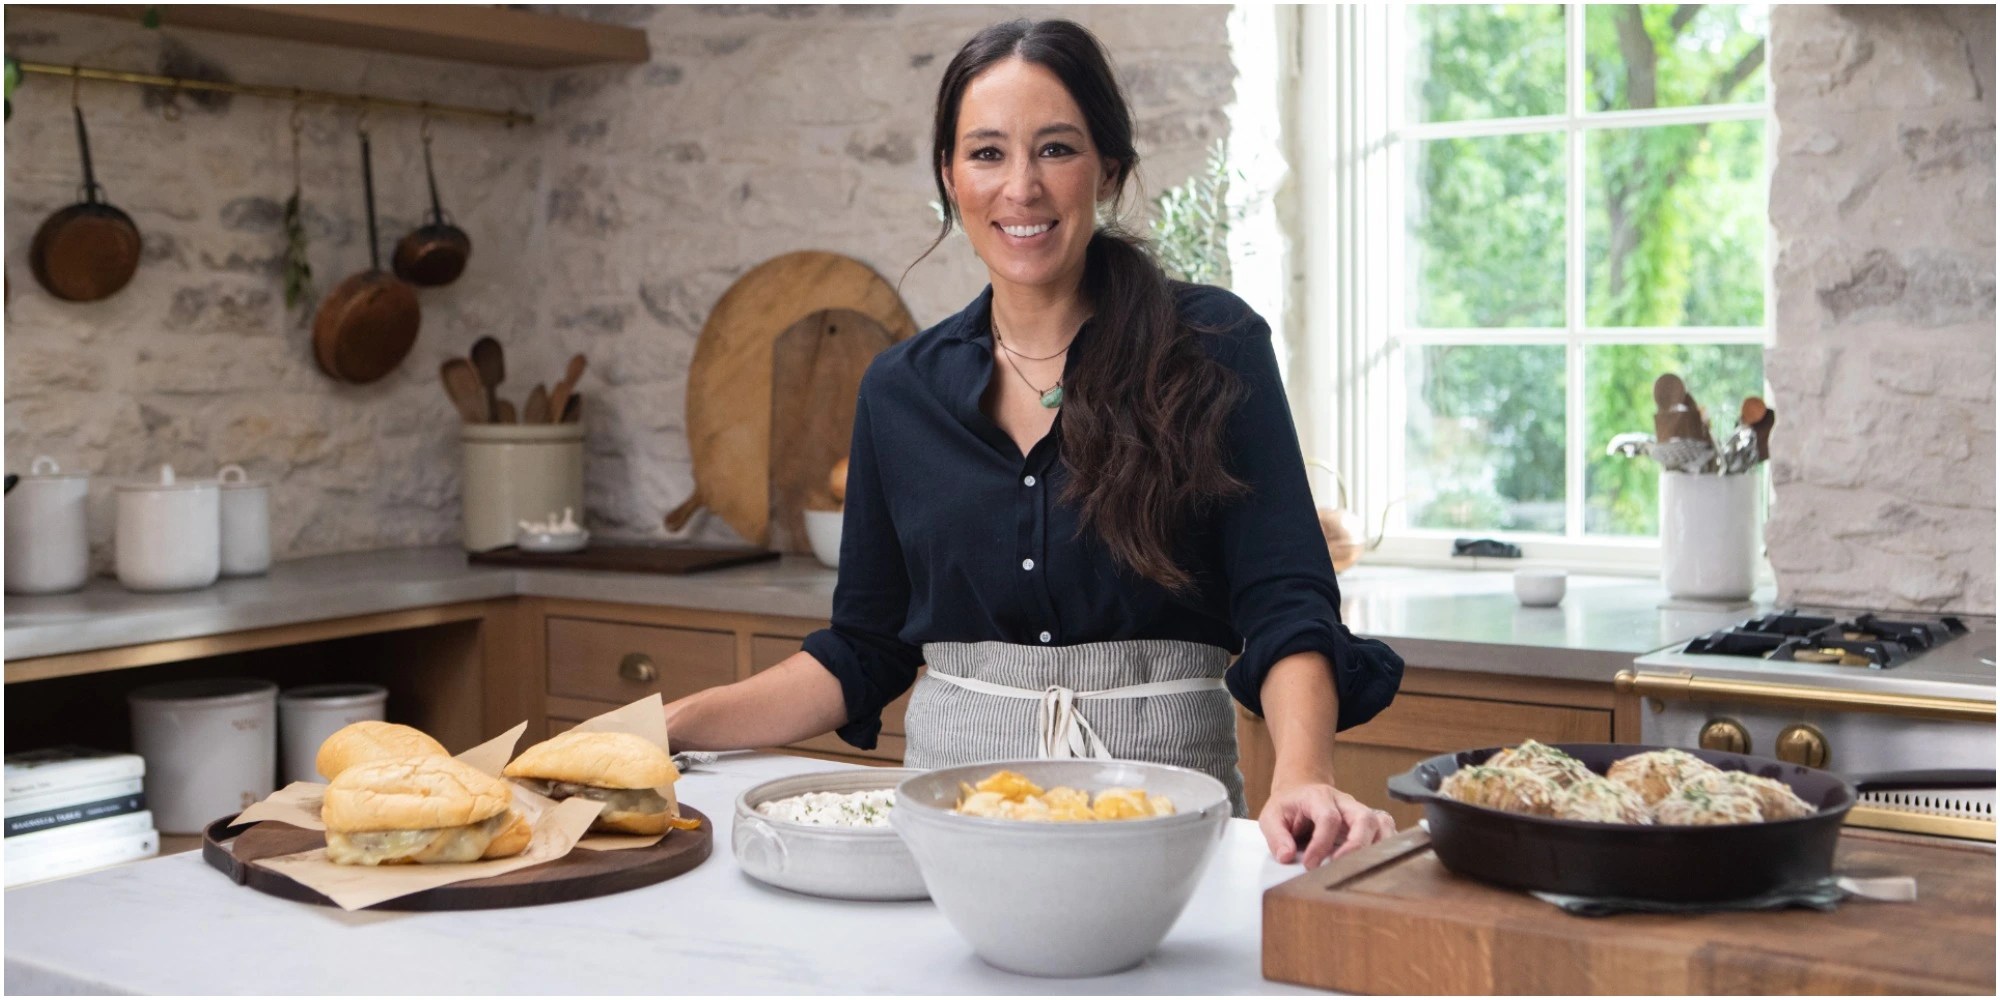 Joanna Gaines Says Her Aunt Mary’s Recipe for Christmas Candy Is ‘Time Well Spent’